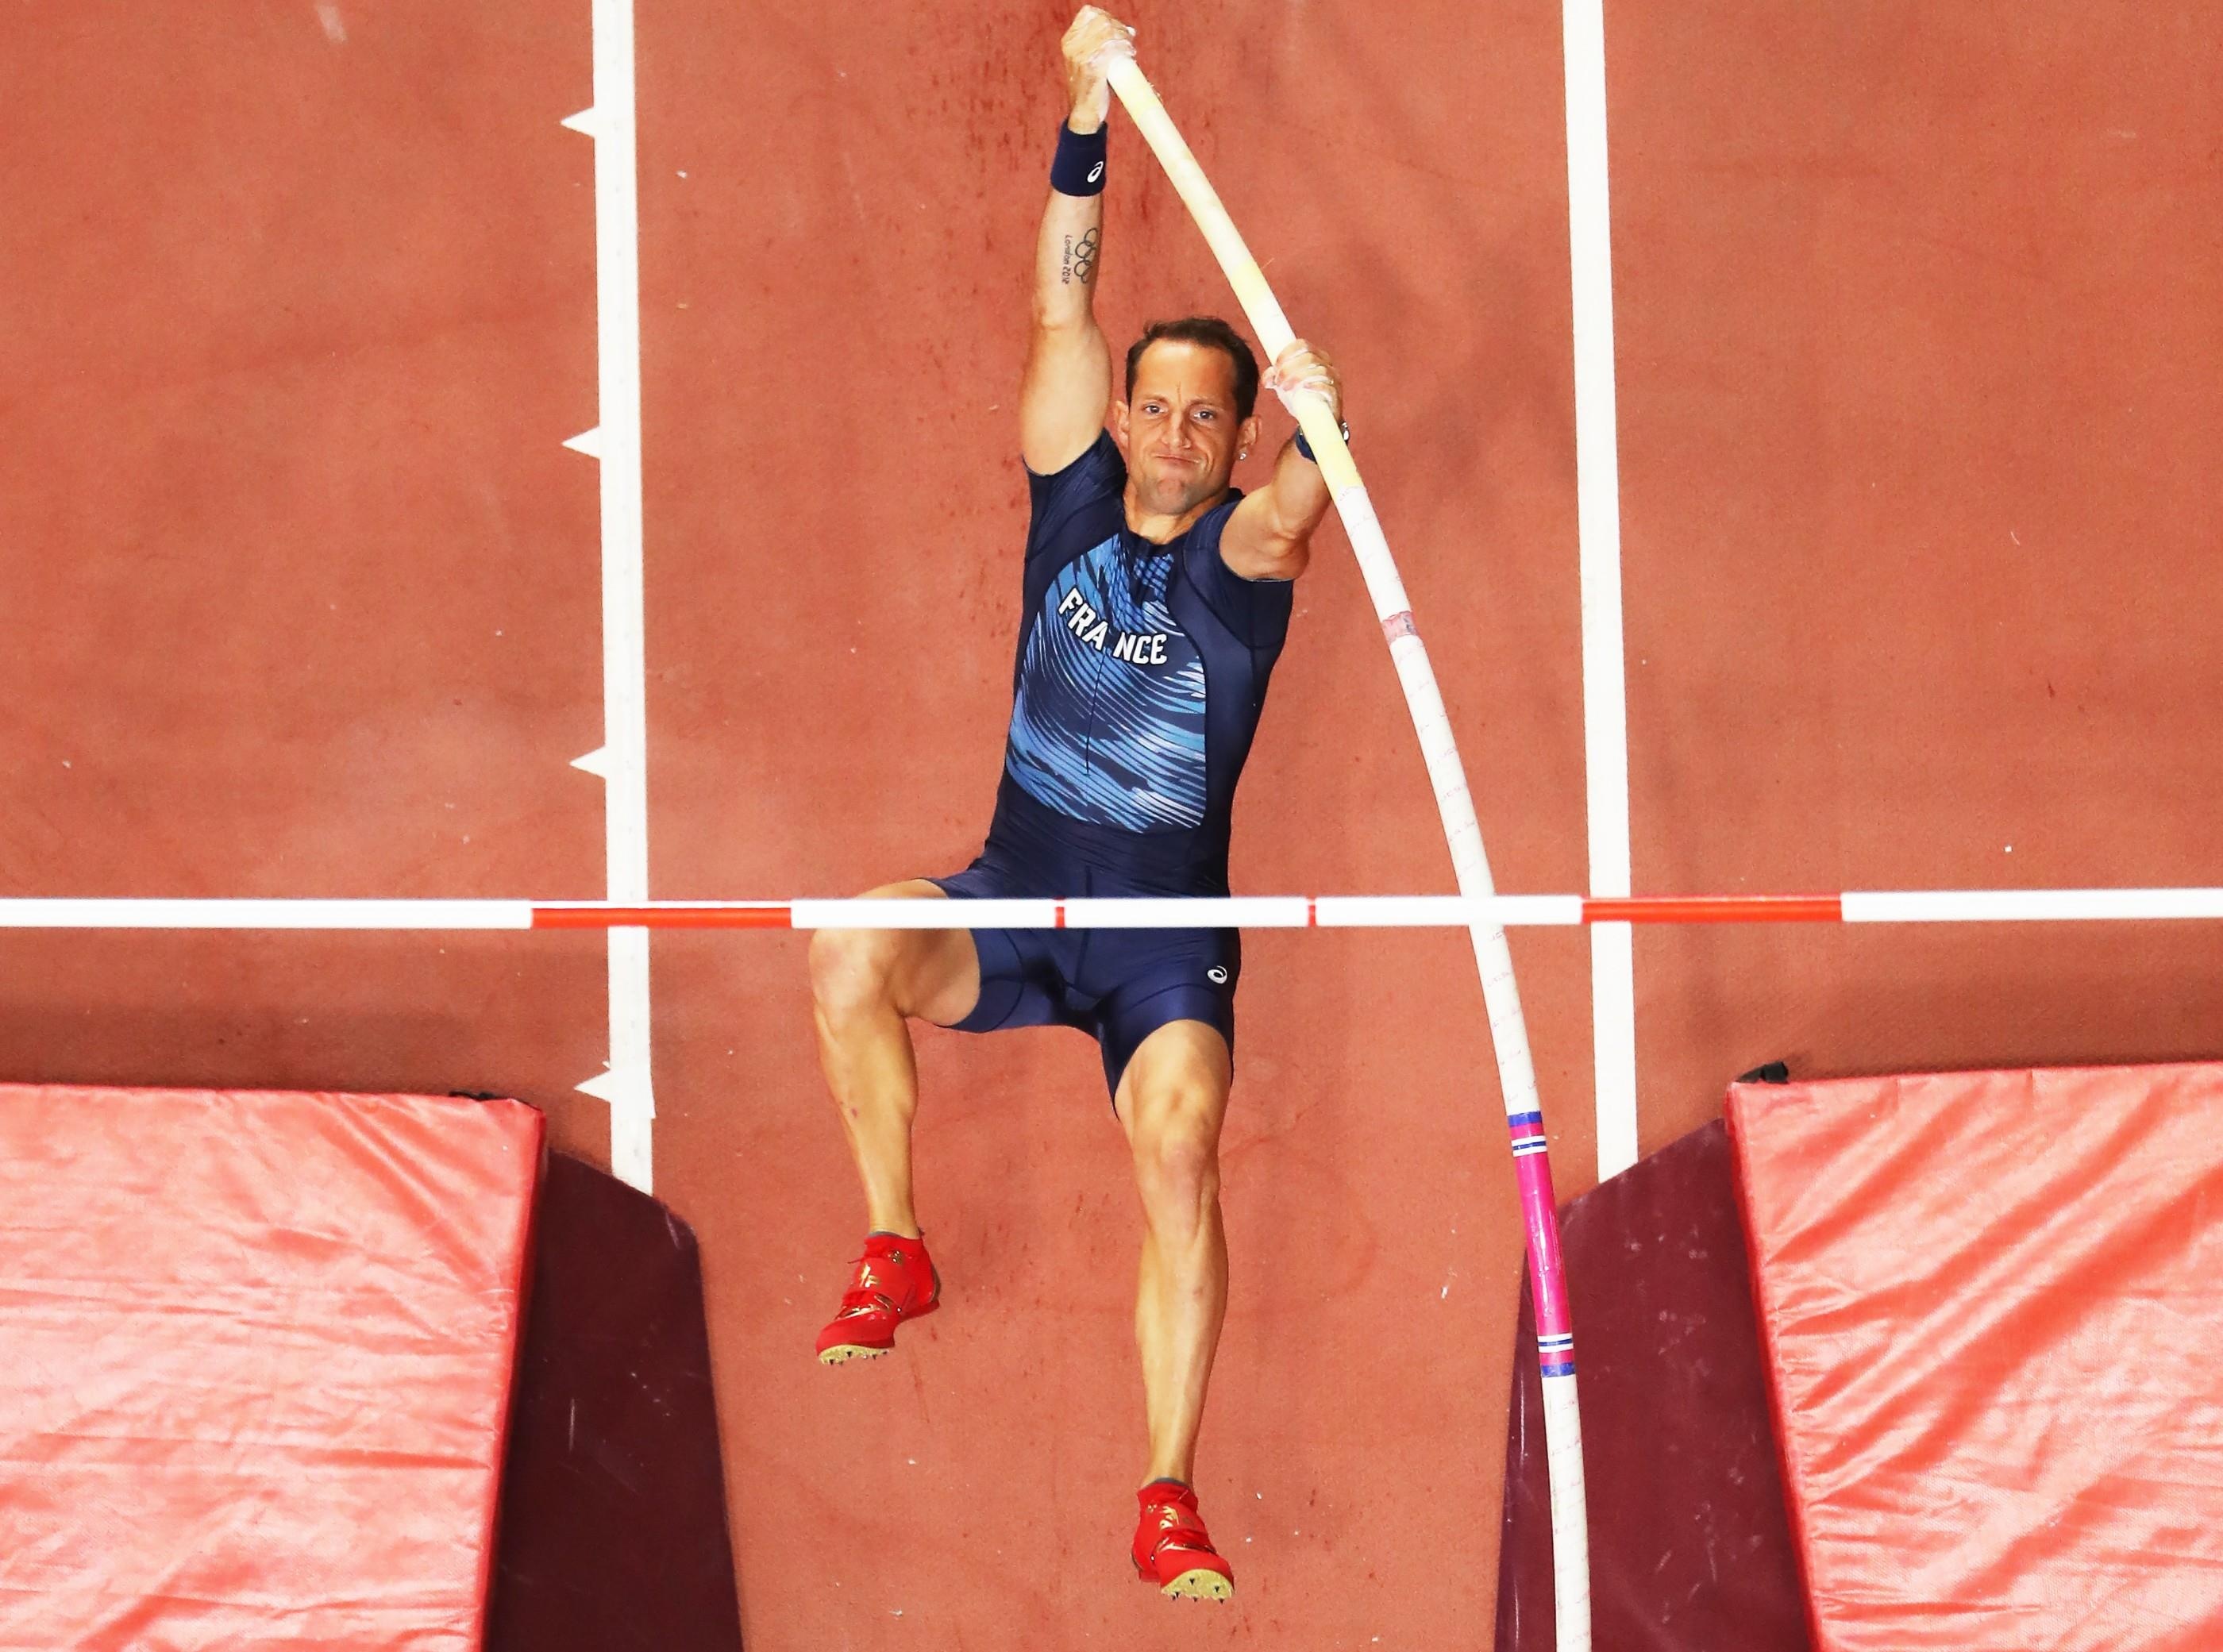 Pole Vaulting: Team France, Renaud Lavillenie, A jump for height over a horizontal bar in a track and field contest. 2800x2090 HD Wallpaper.